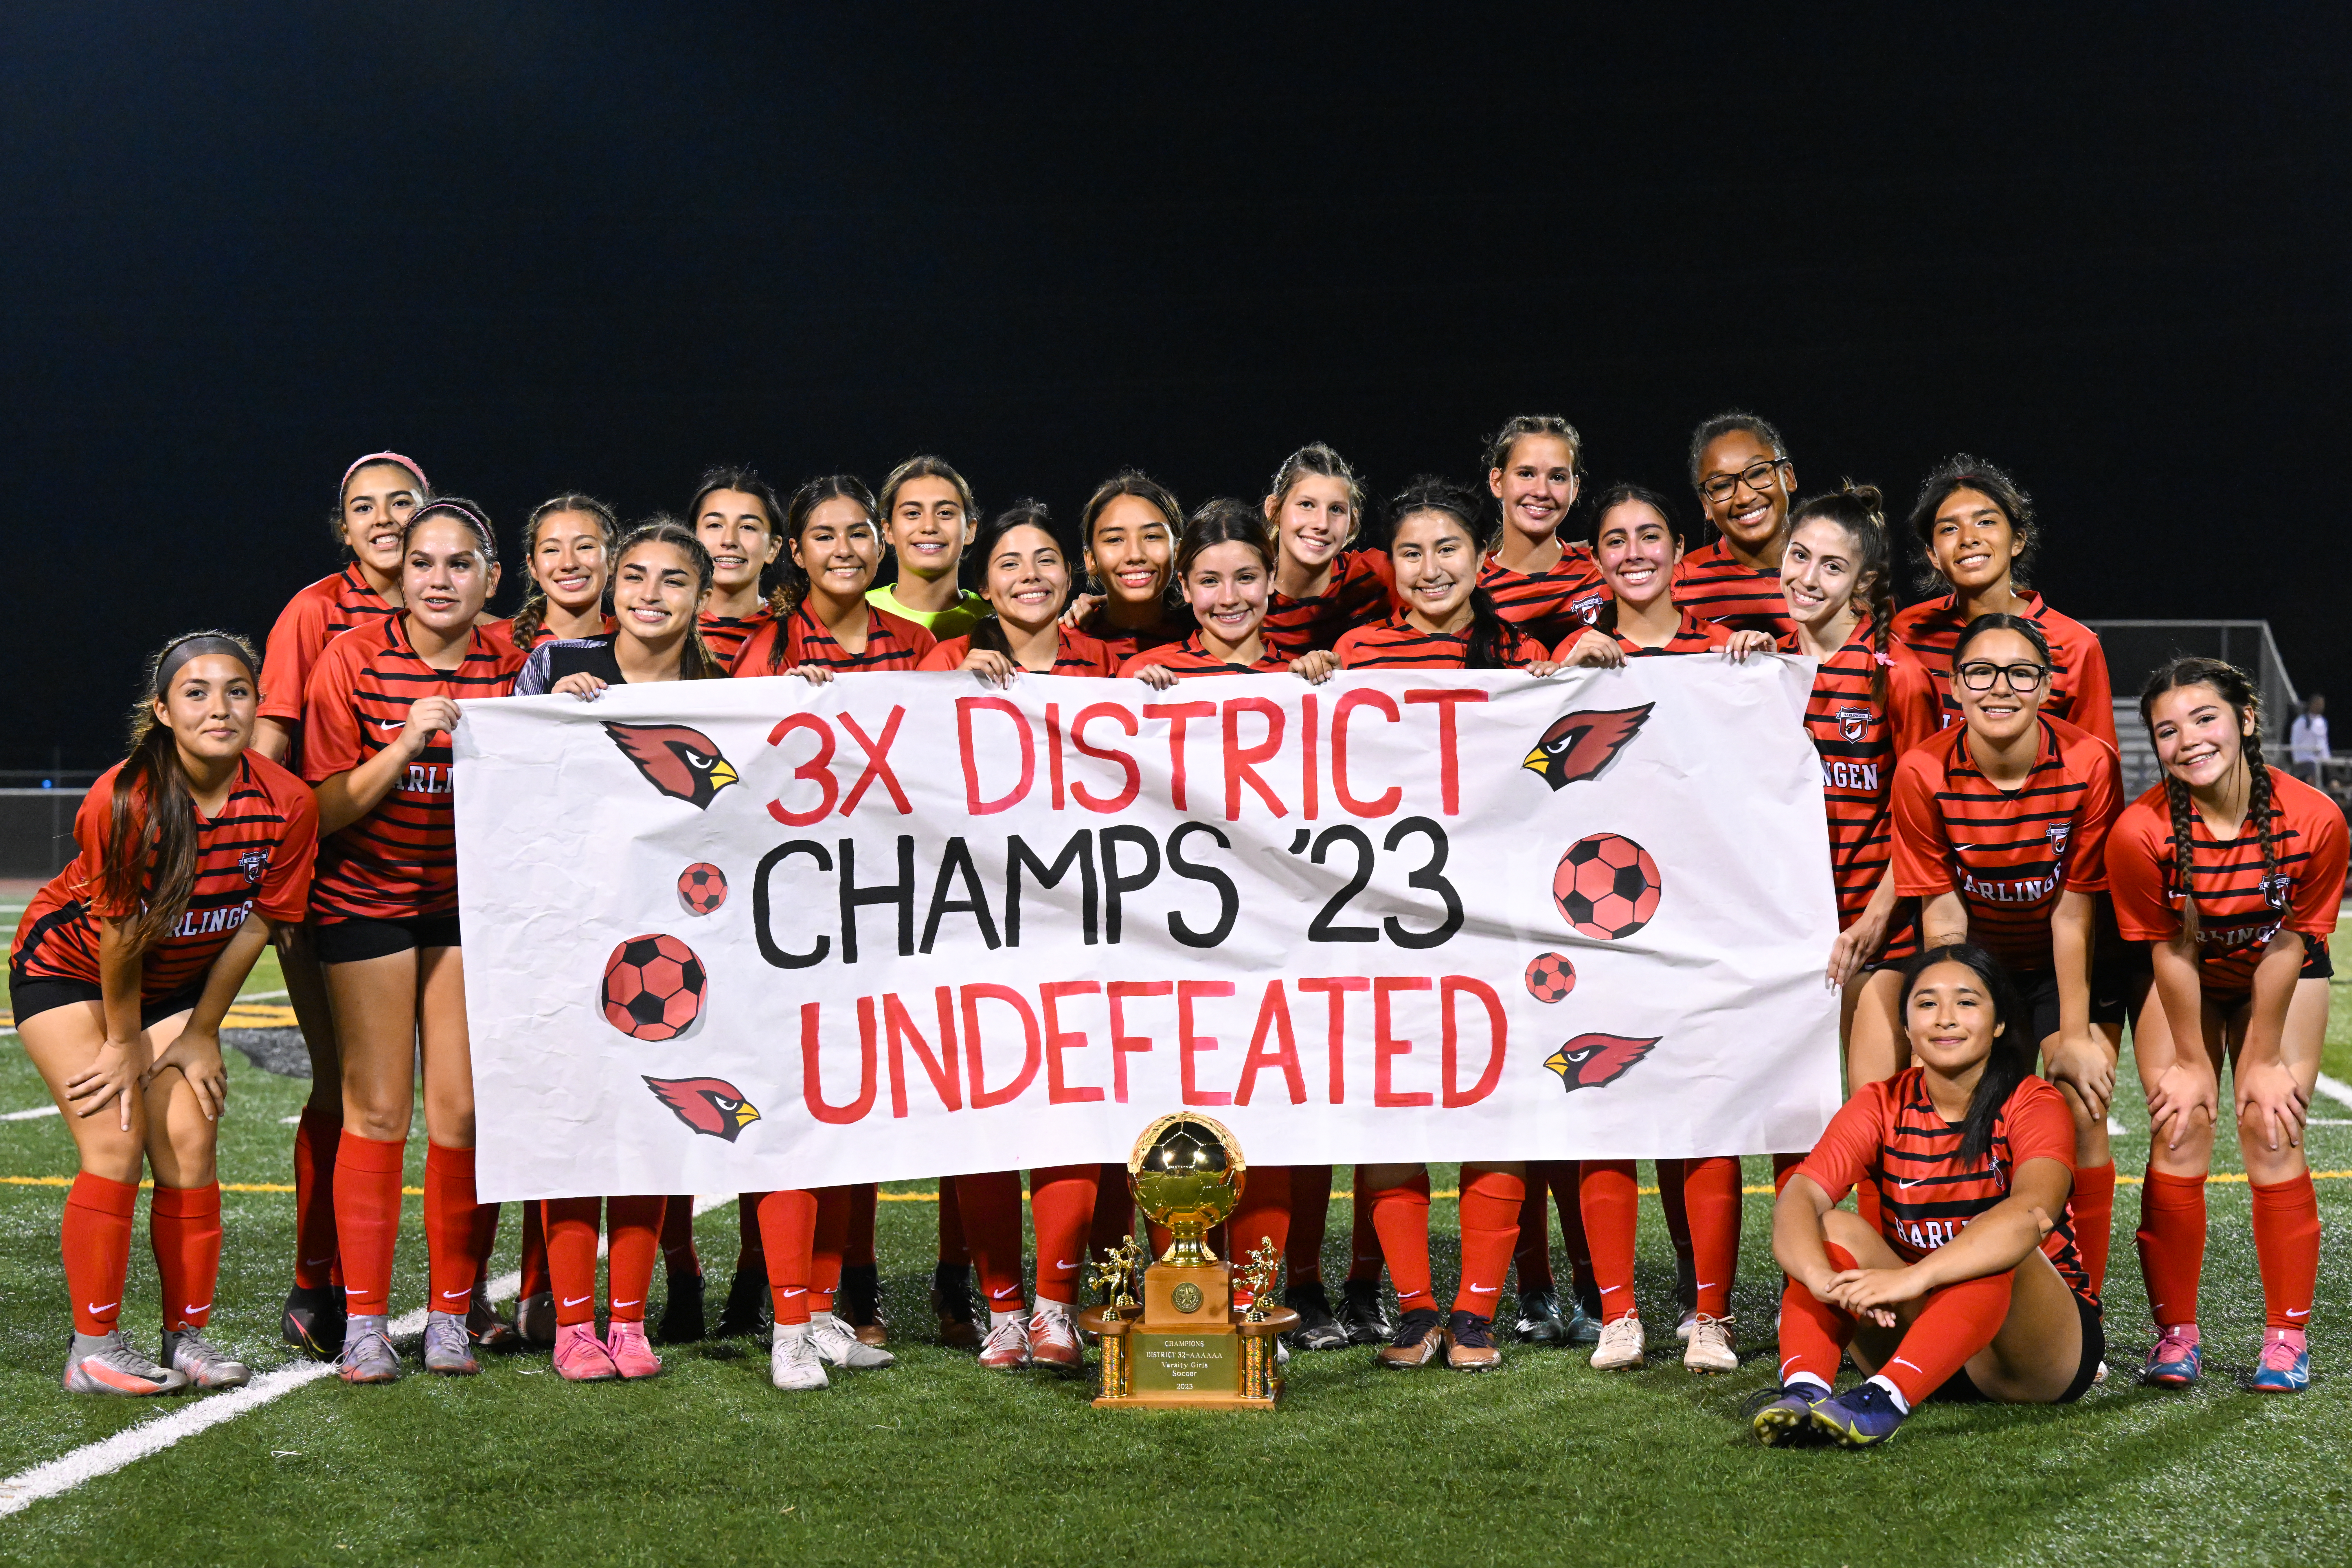 Lady Cardinal soccer team named District Champs